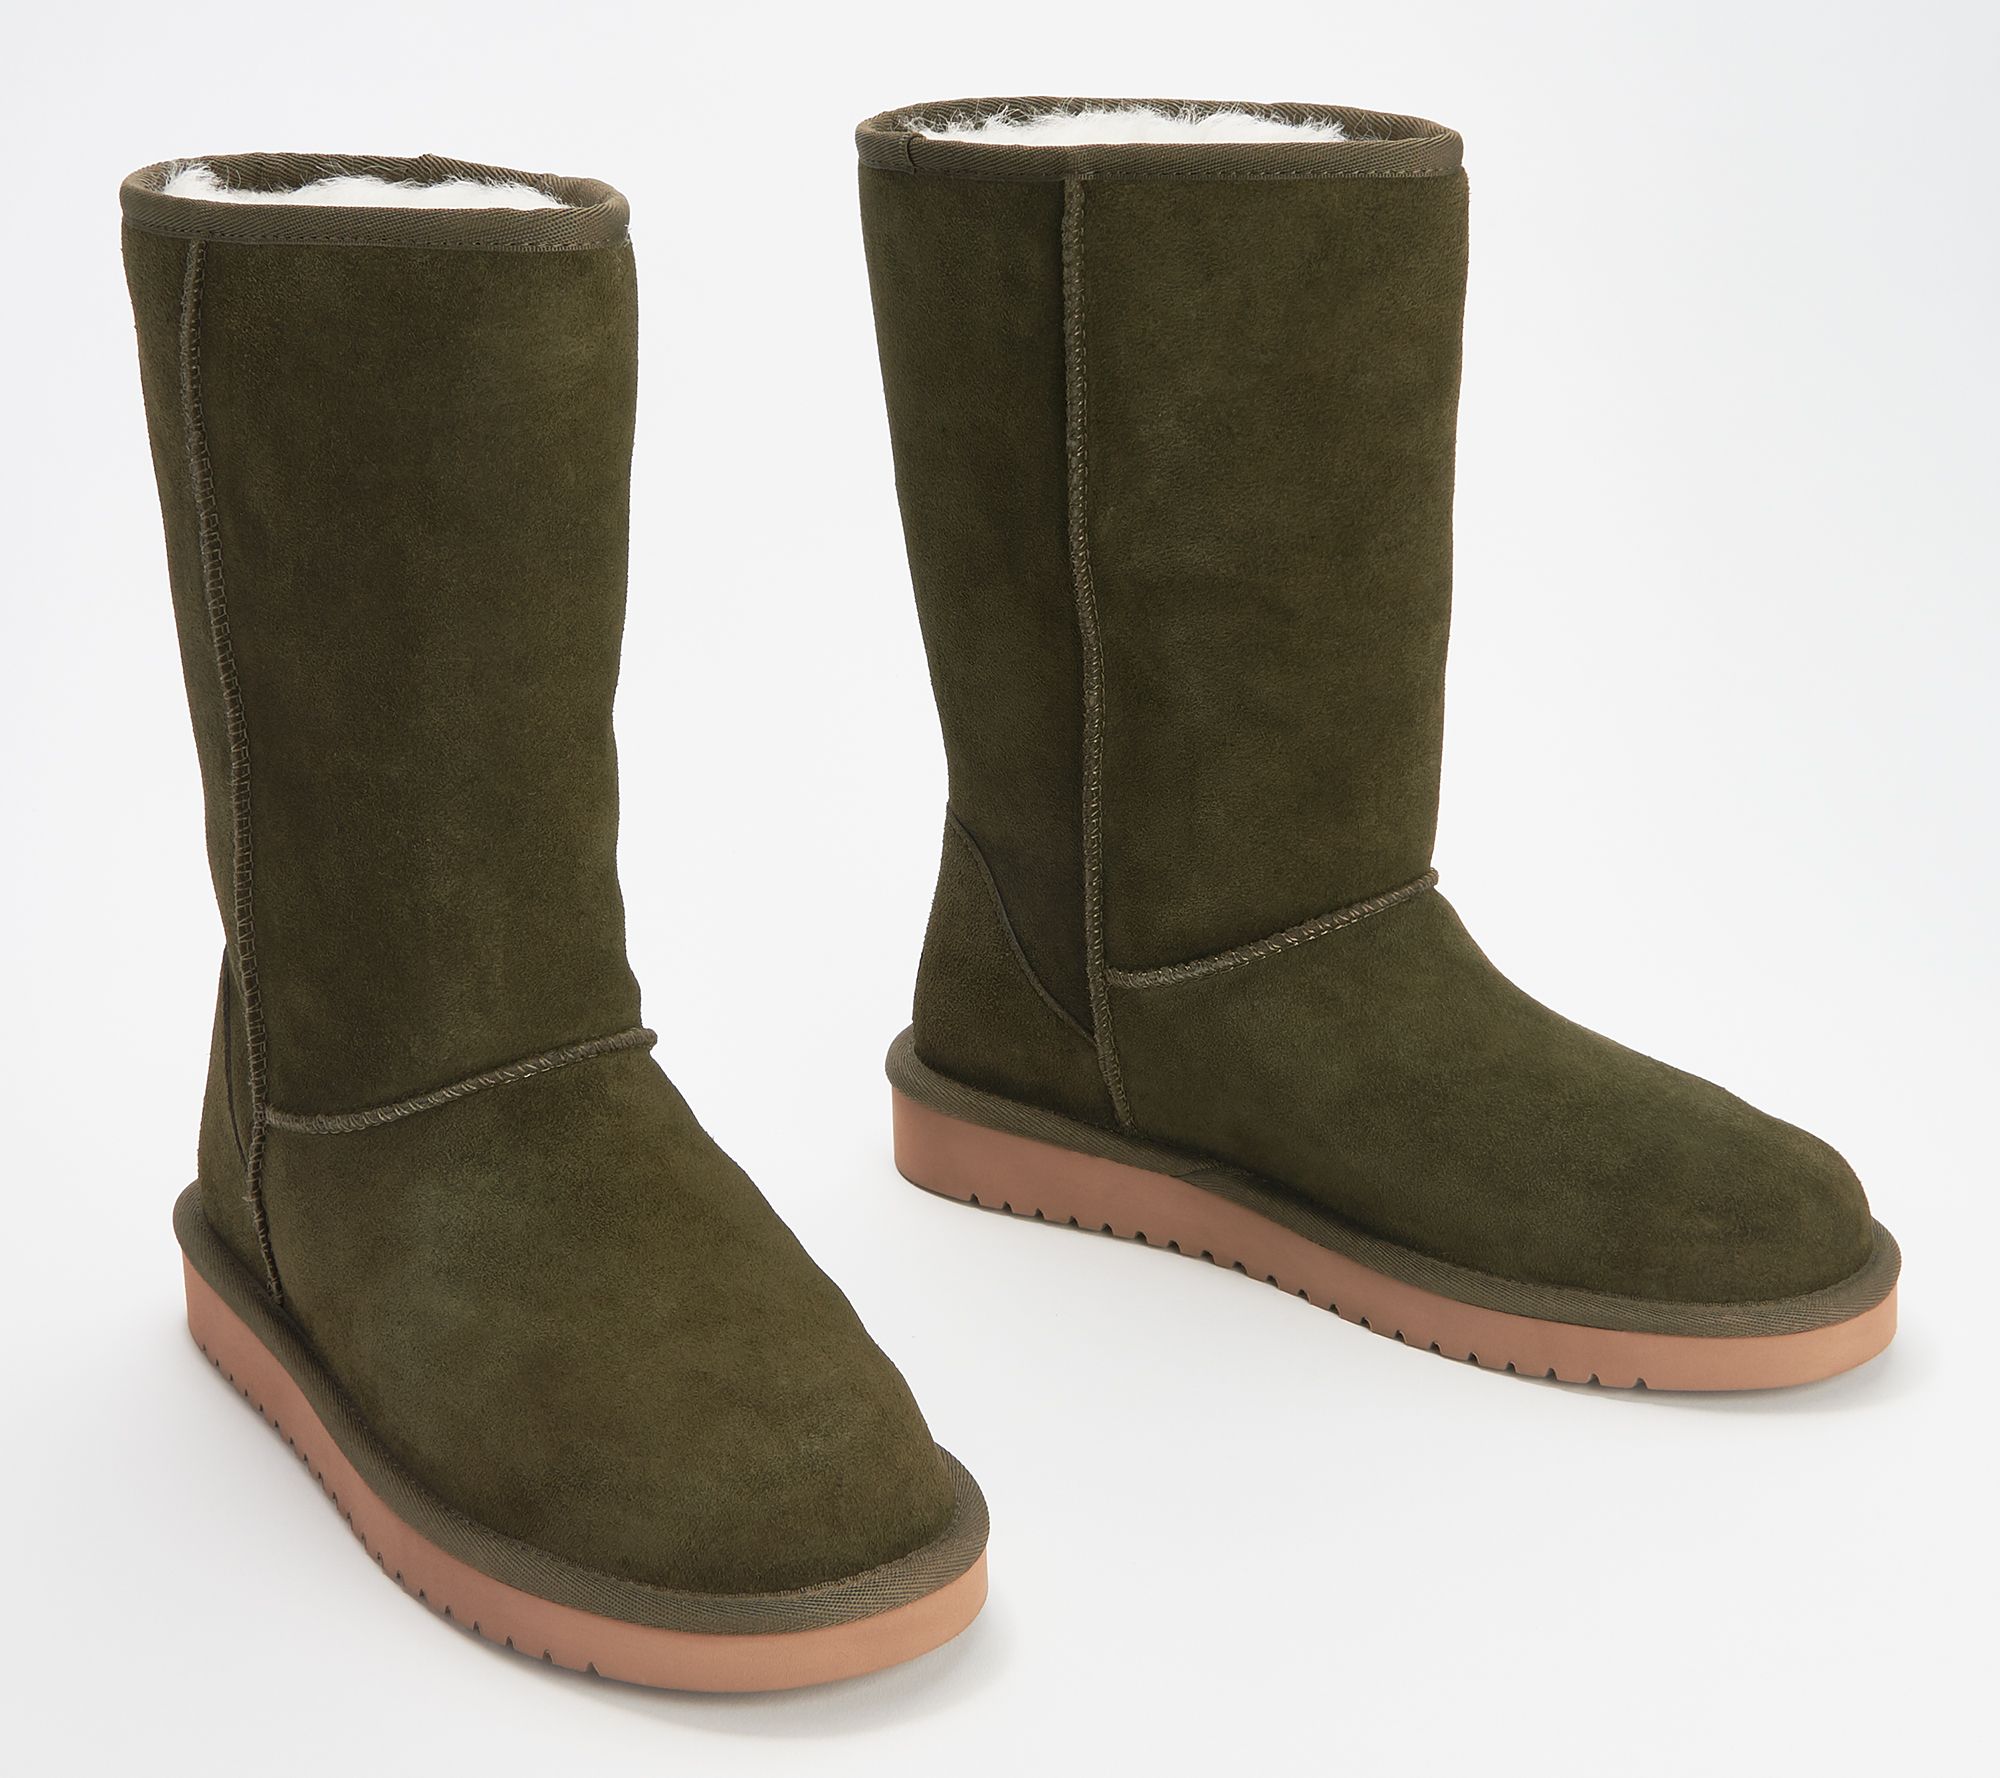 Koolaburra by UGG Suede Tall Boots 